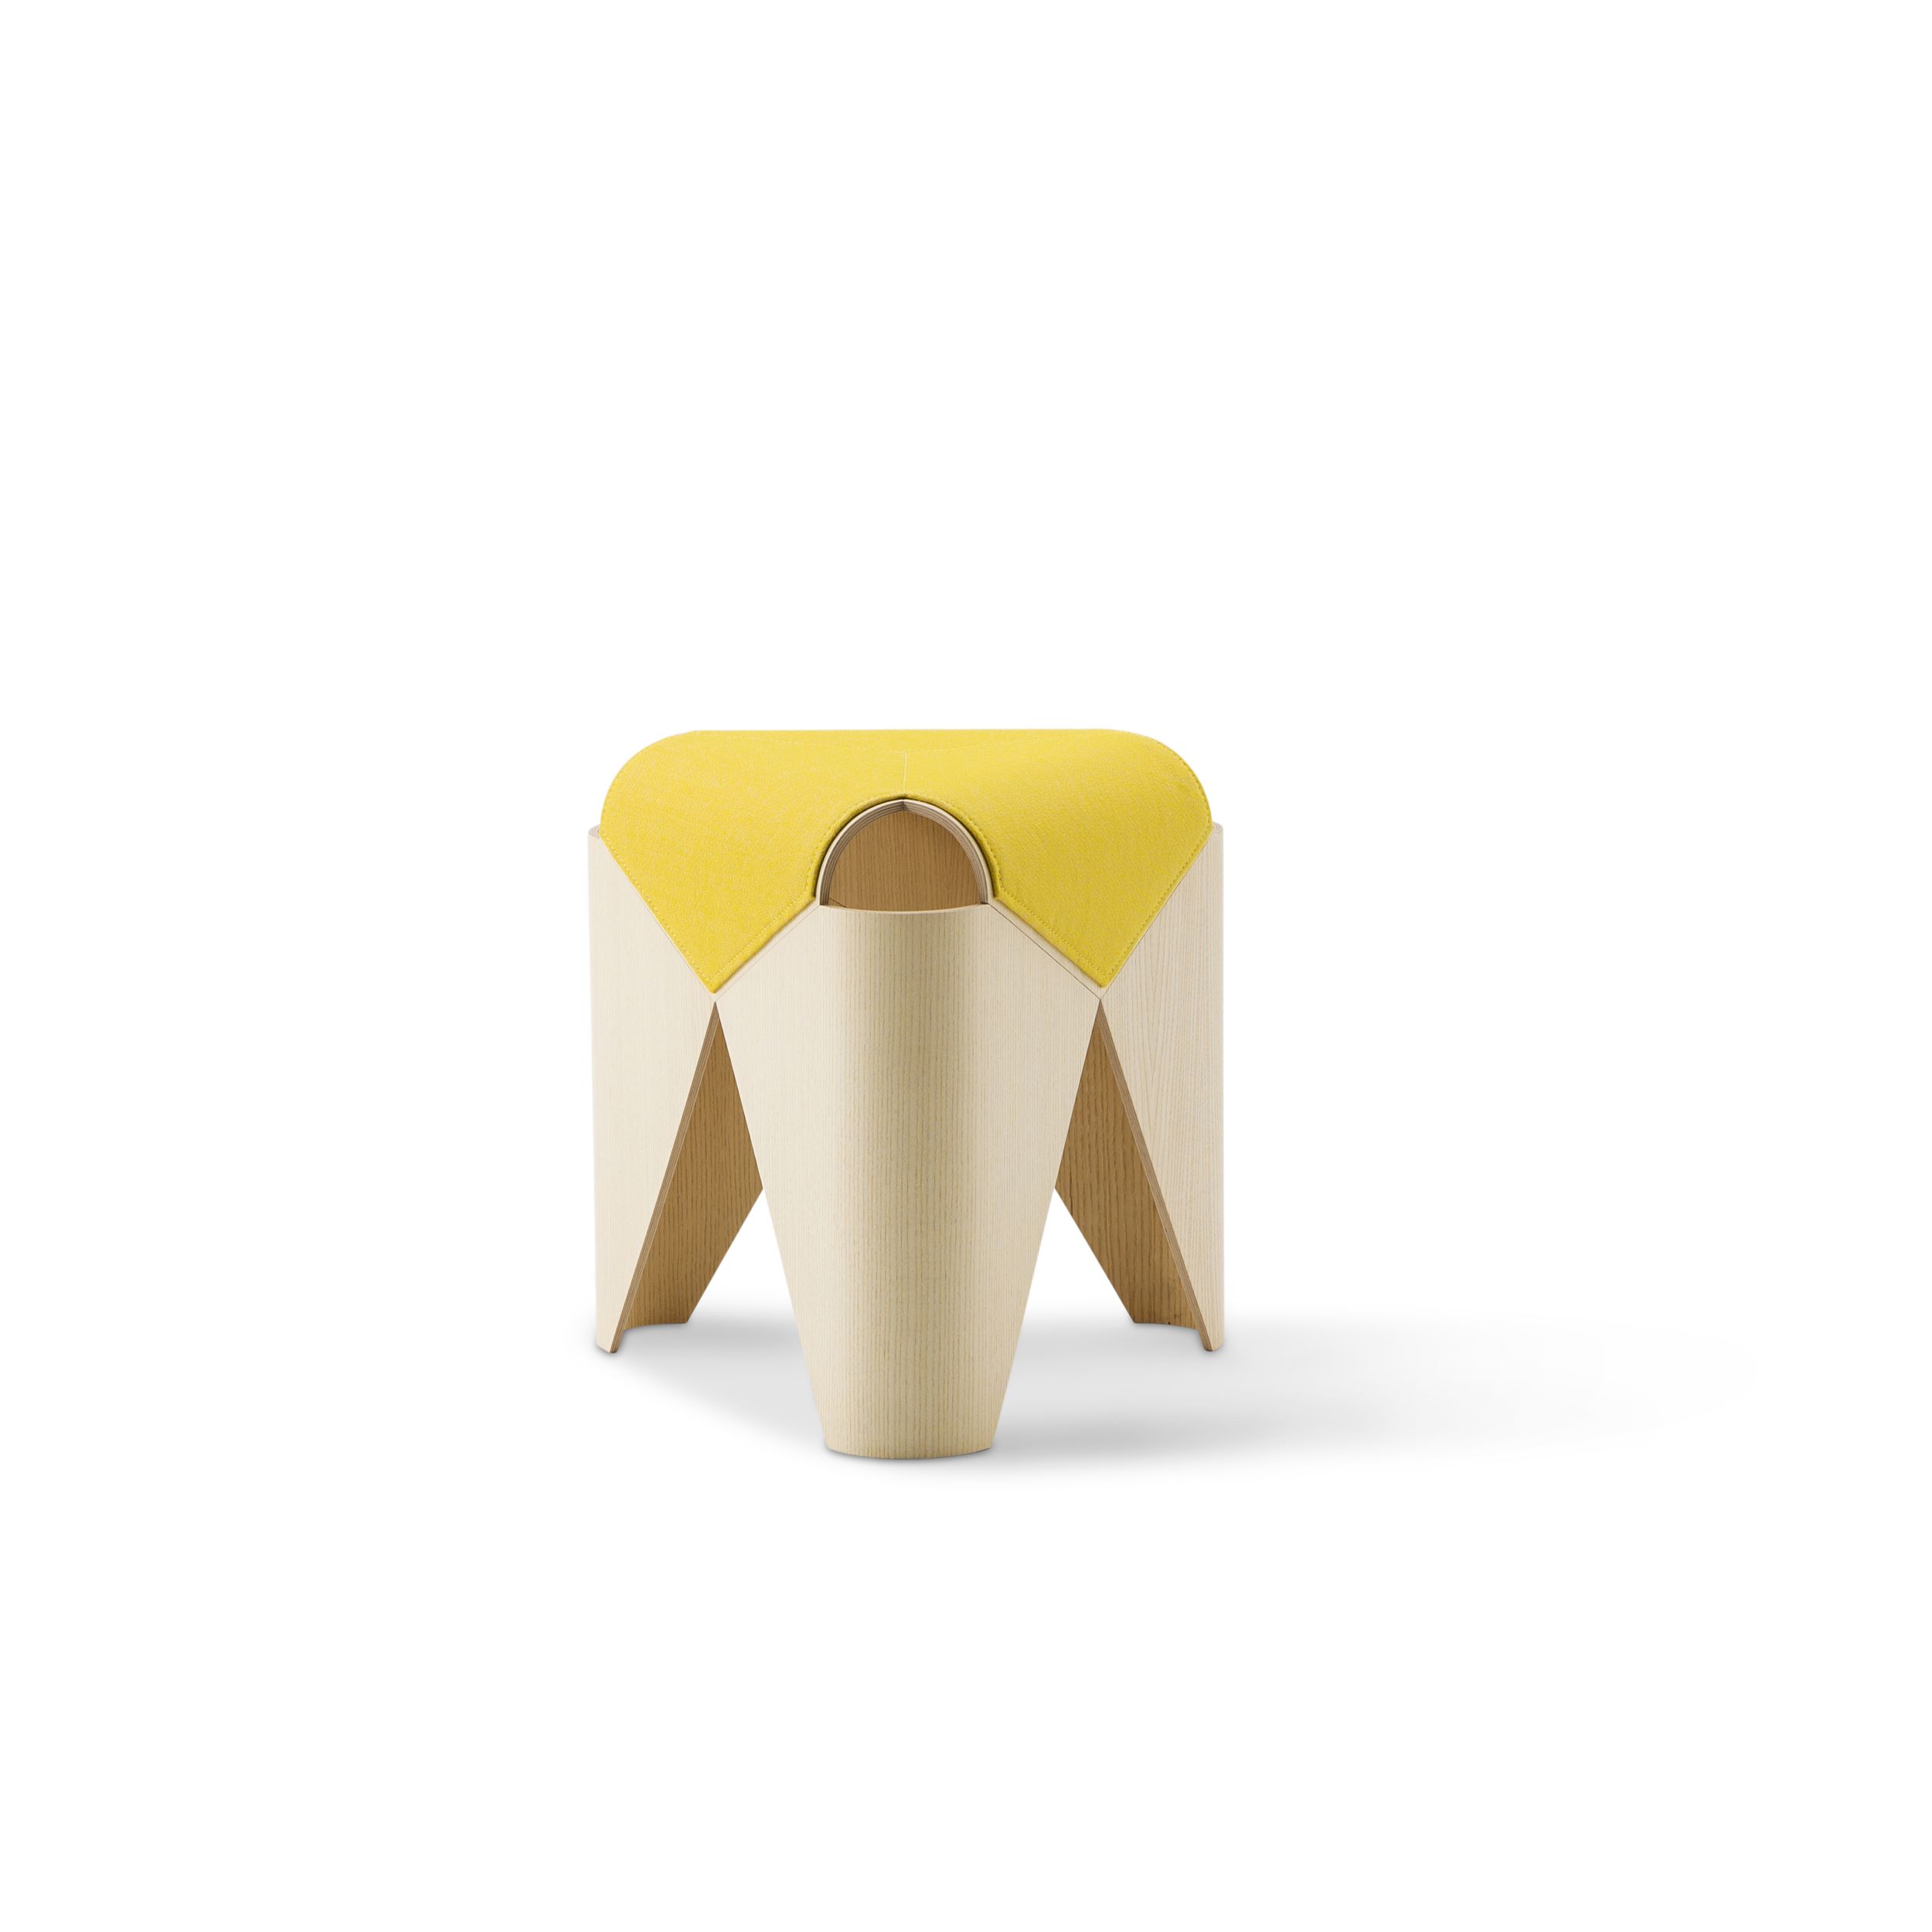 Falabella, Stool by Lucy Kurrein